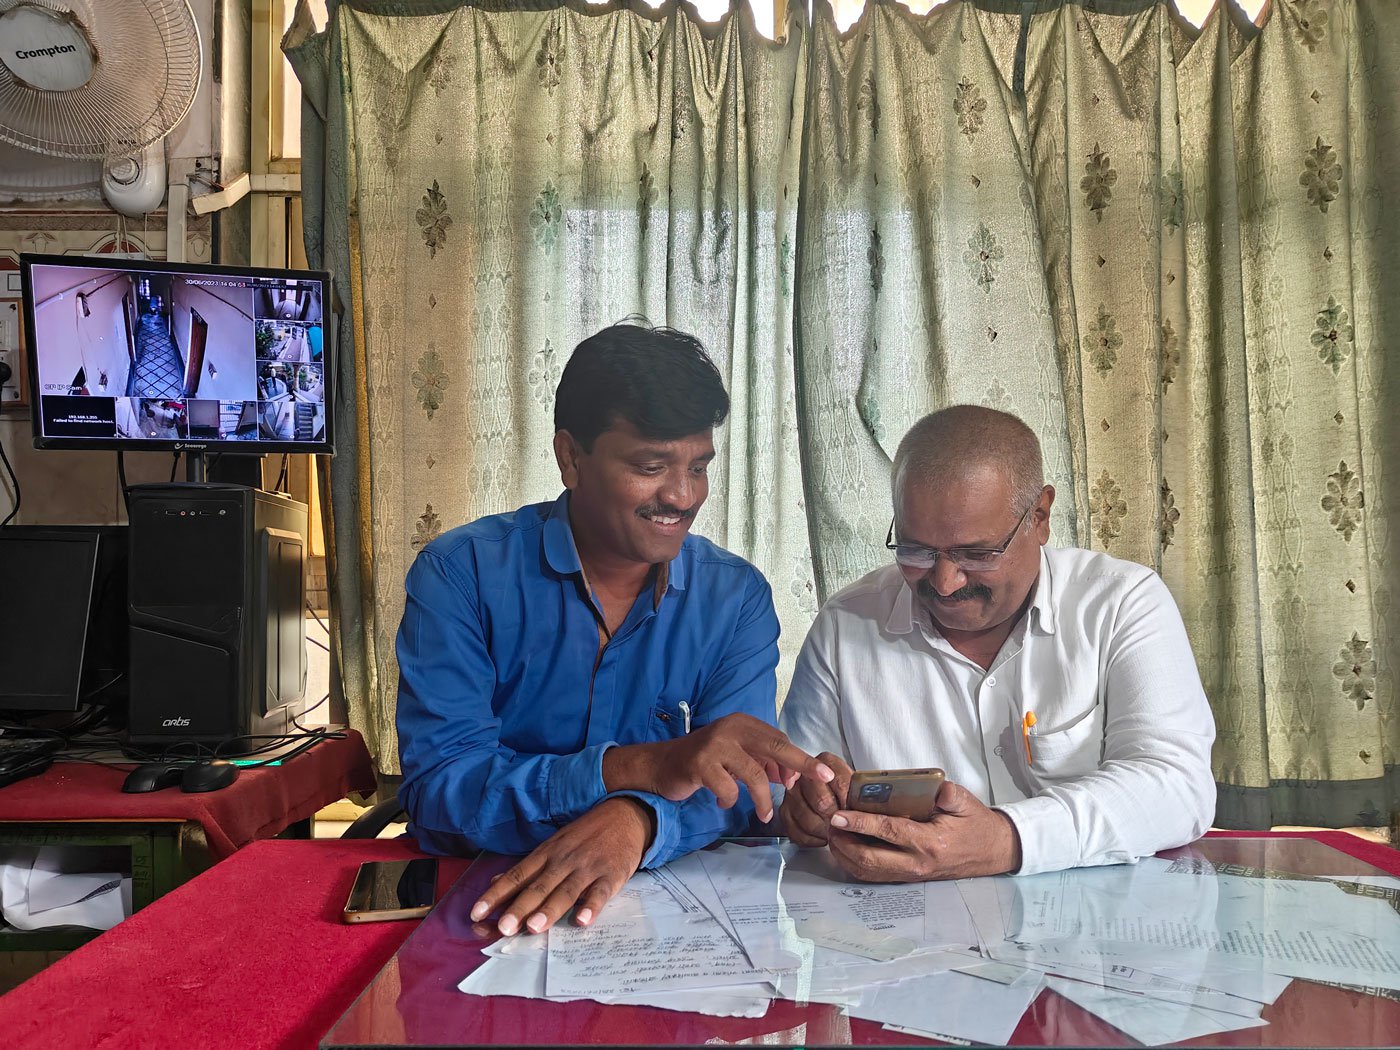 Tatwasheel Kamble (left) and Ashok Tangde (right) are child rights activists working in Beed, Maharashtra. In the past decade, they have together prevented over 4,000 child marriages